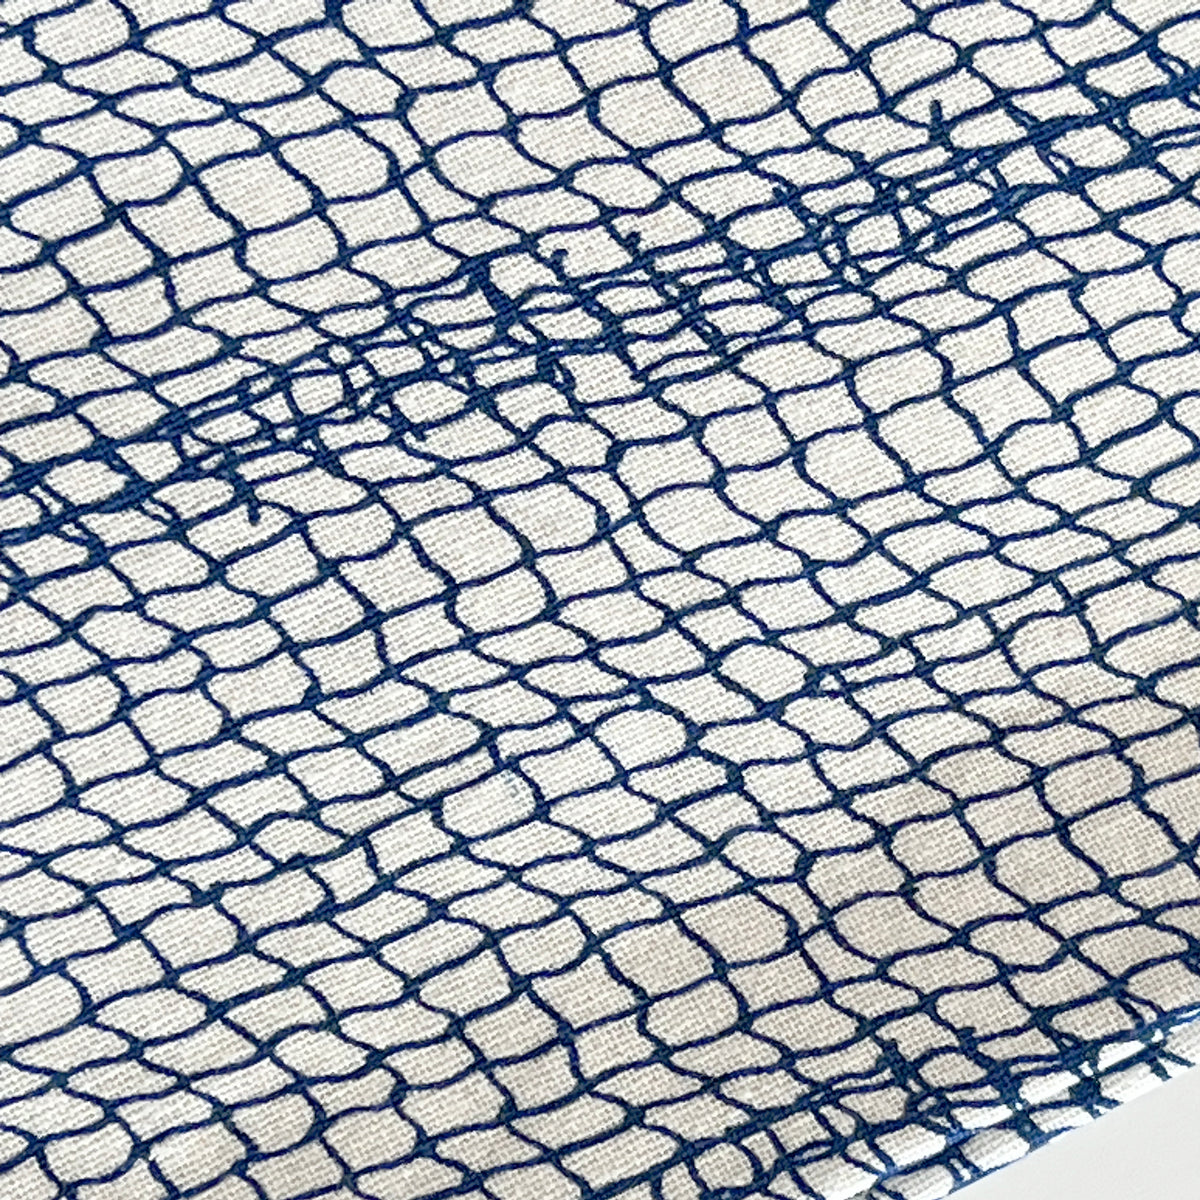 Close-up of a white fabric with an irregular blue grid pattern, reminiscent of rippling water at a serene lake house from the Lake House Bundle by Caskata.